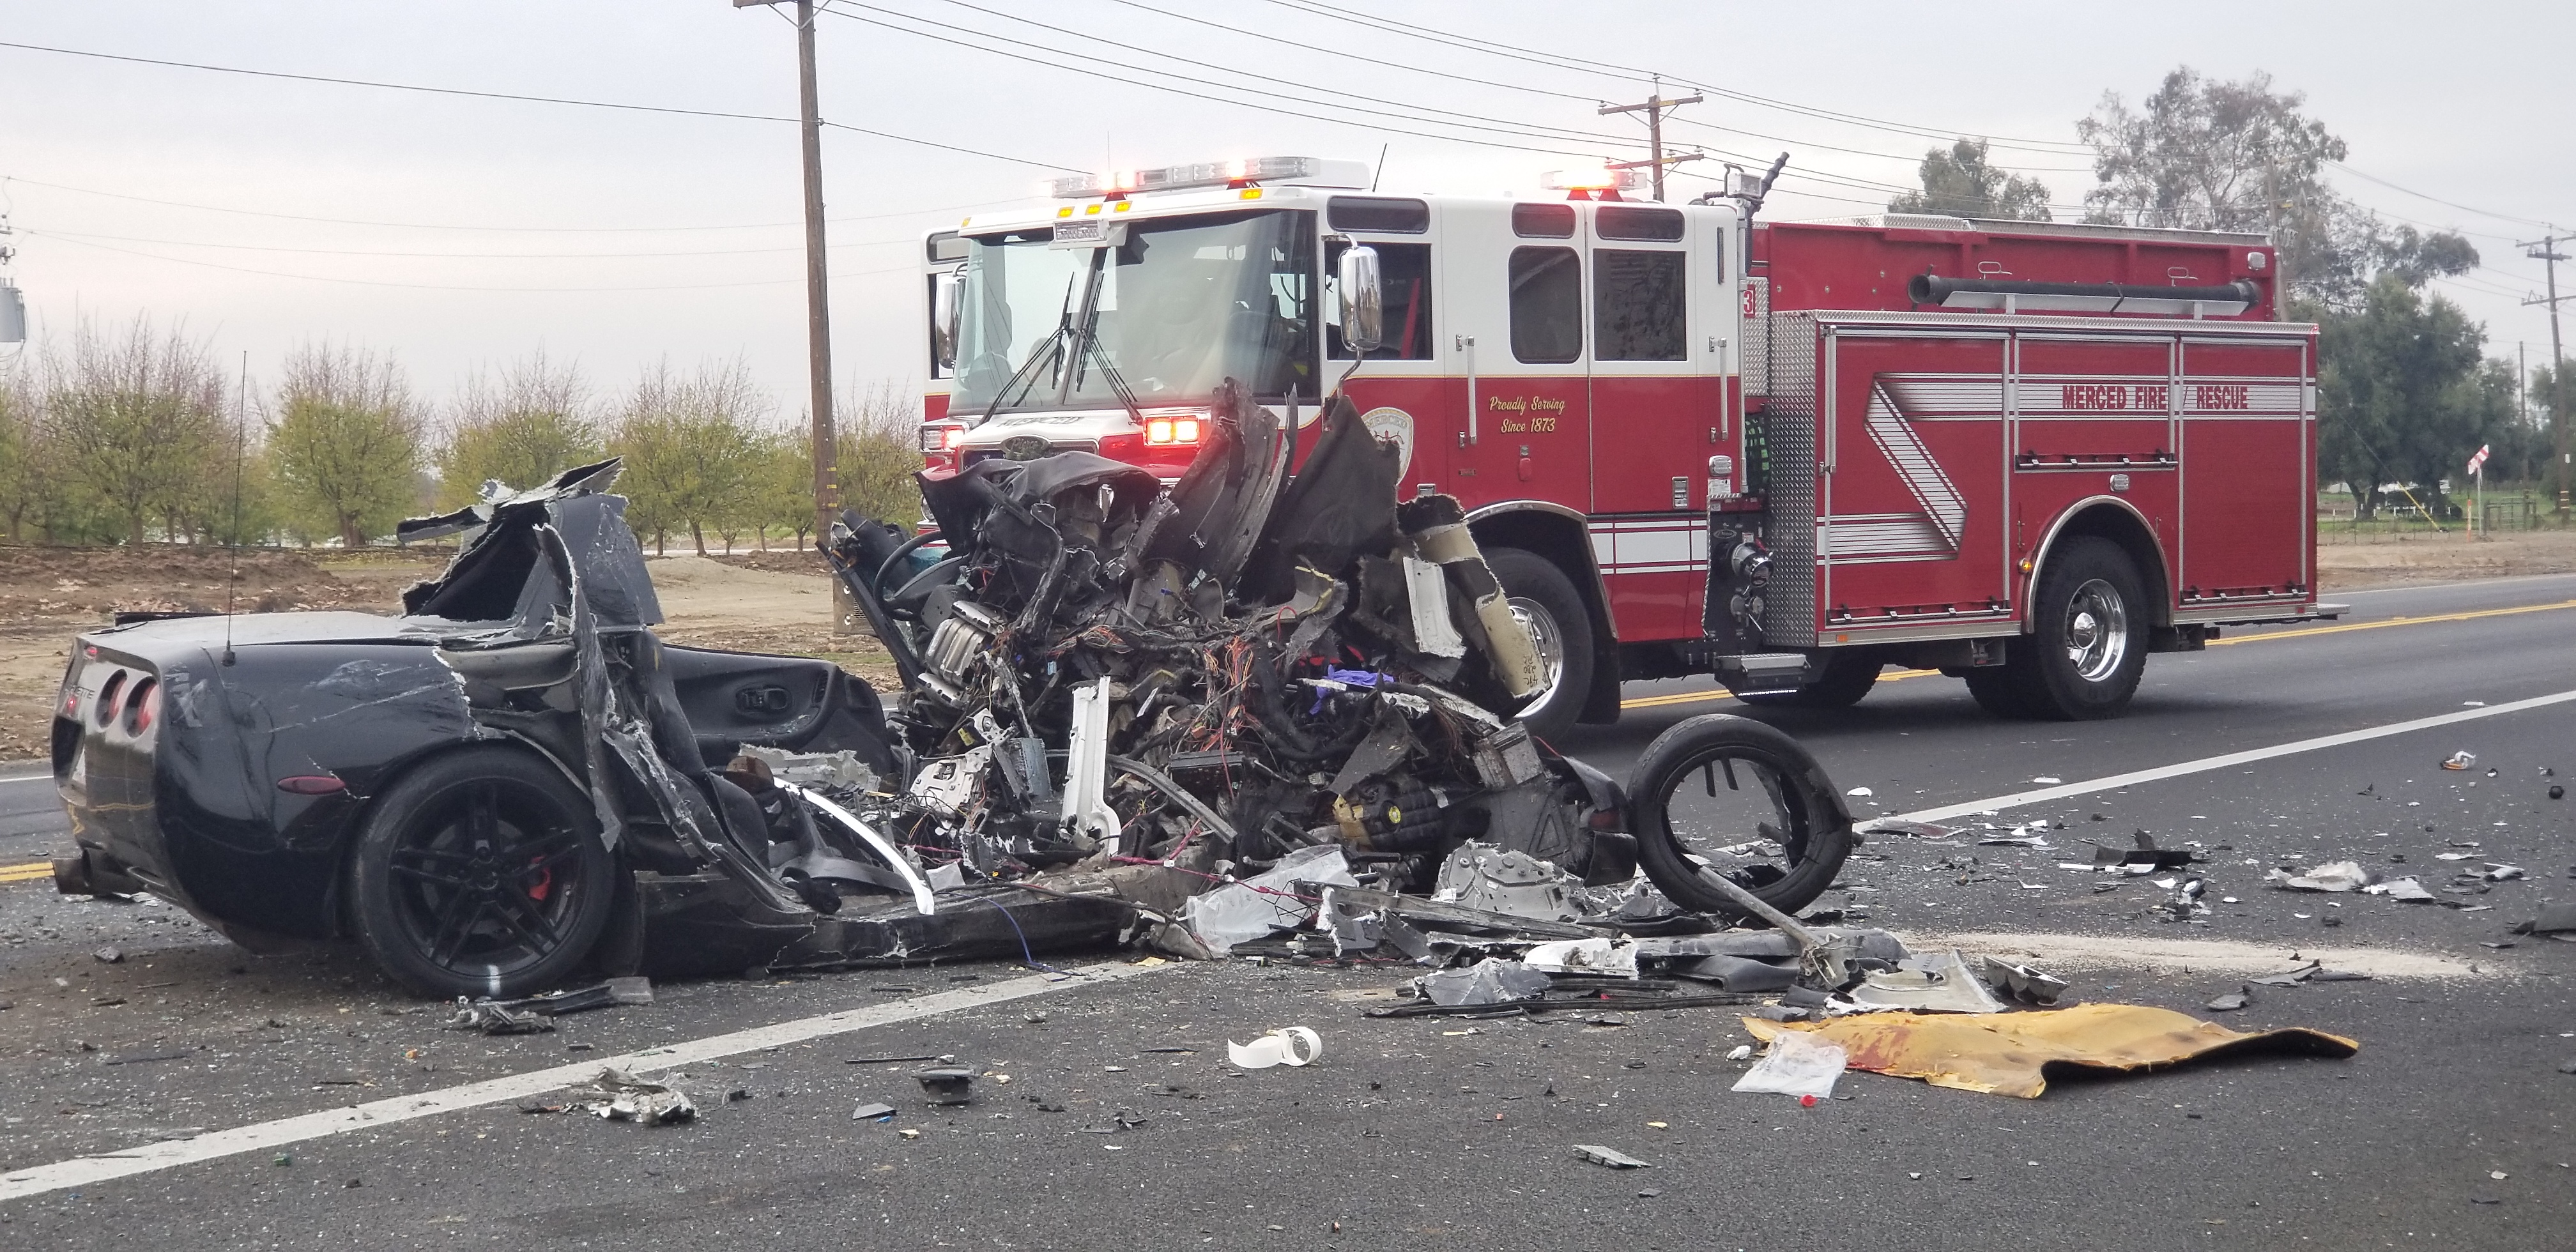 CORVETTE CRASHES WITH TRUCK IN MERCED MAJOR DAMAGE